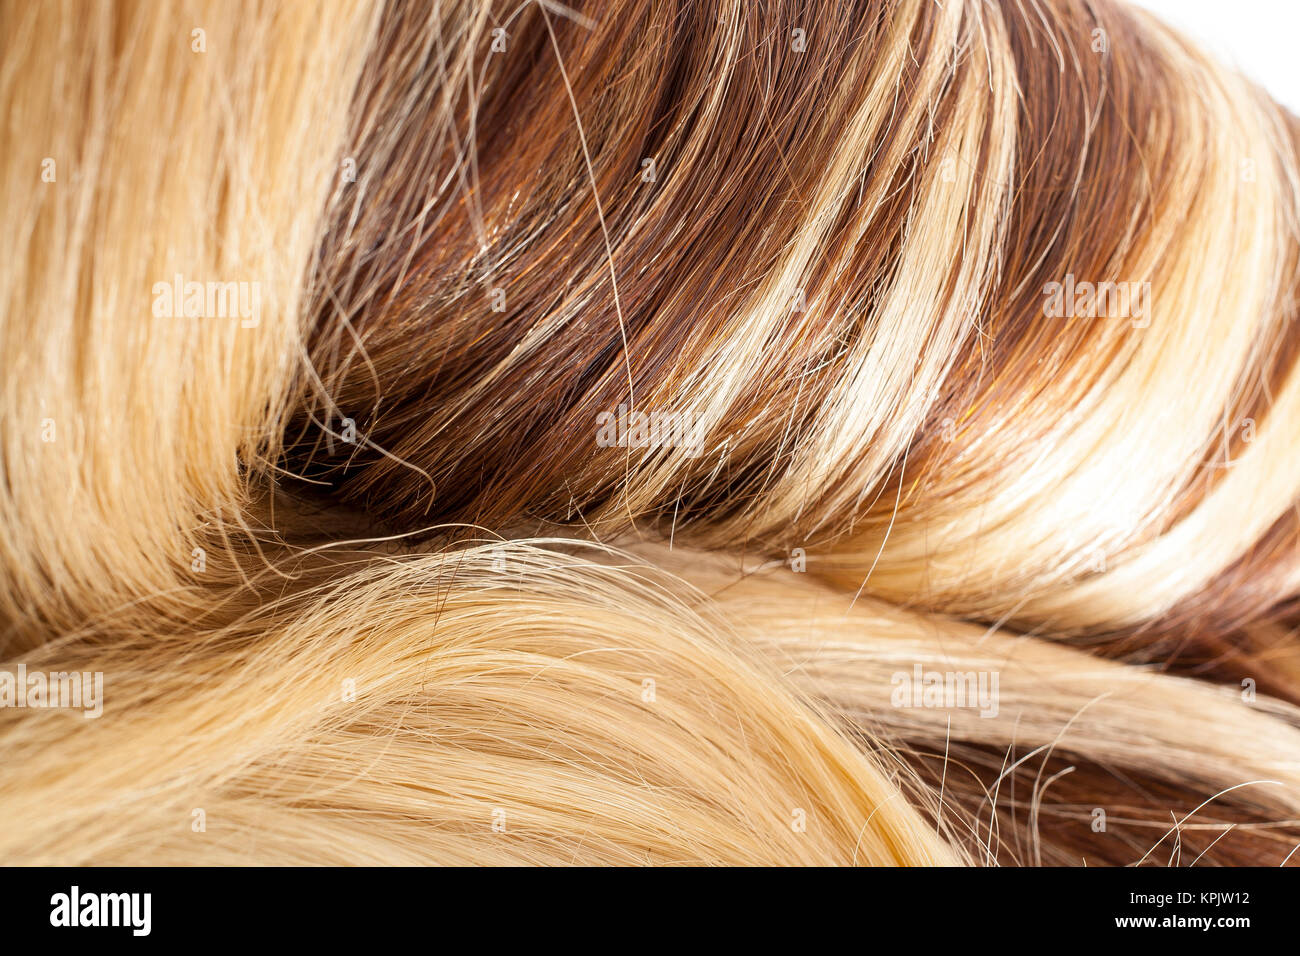 Human hair european hair weft for hair extension. Brown blonde hair texture closeup pattern. Shiny real dyed tail. Stock Photo